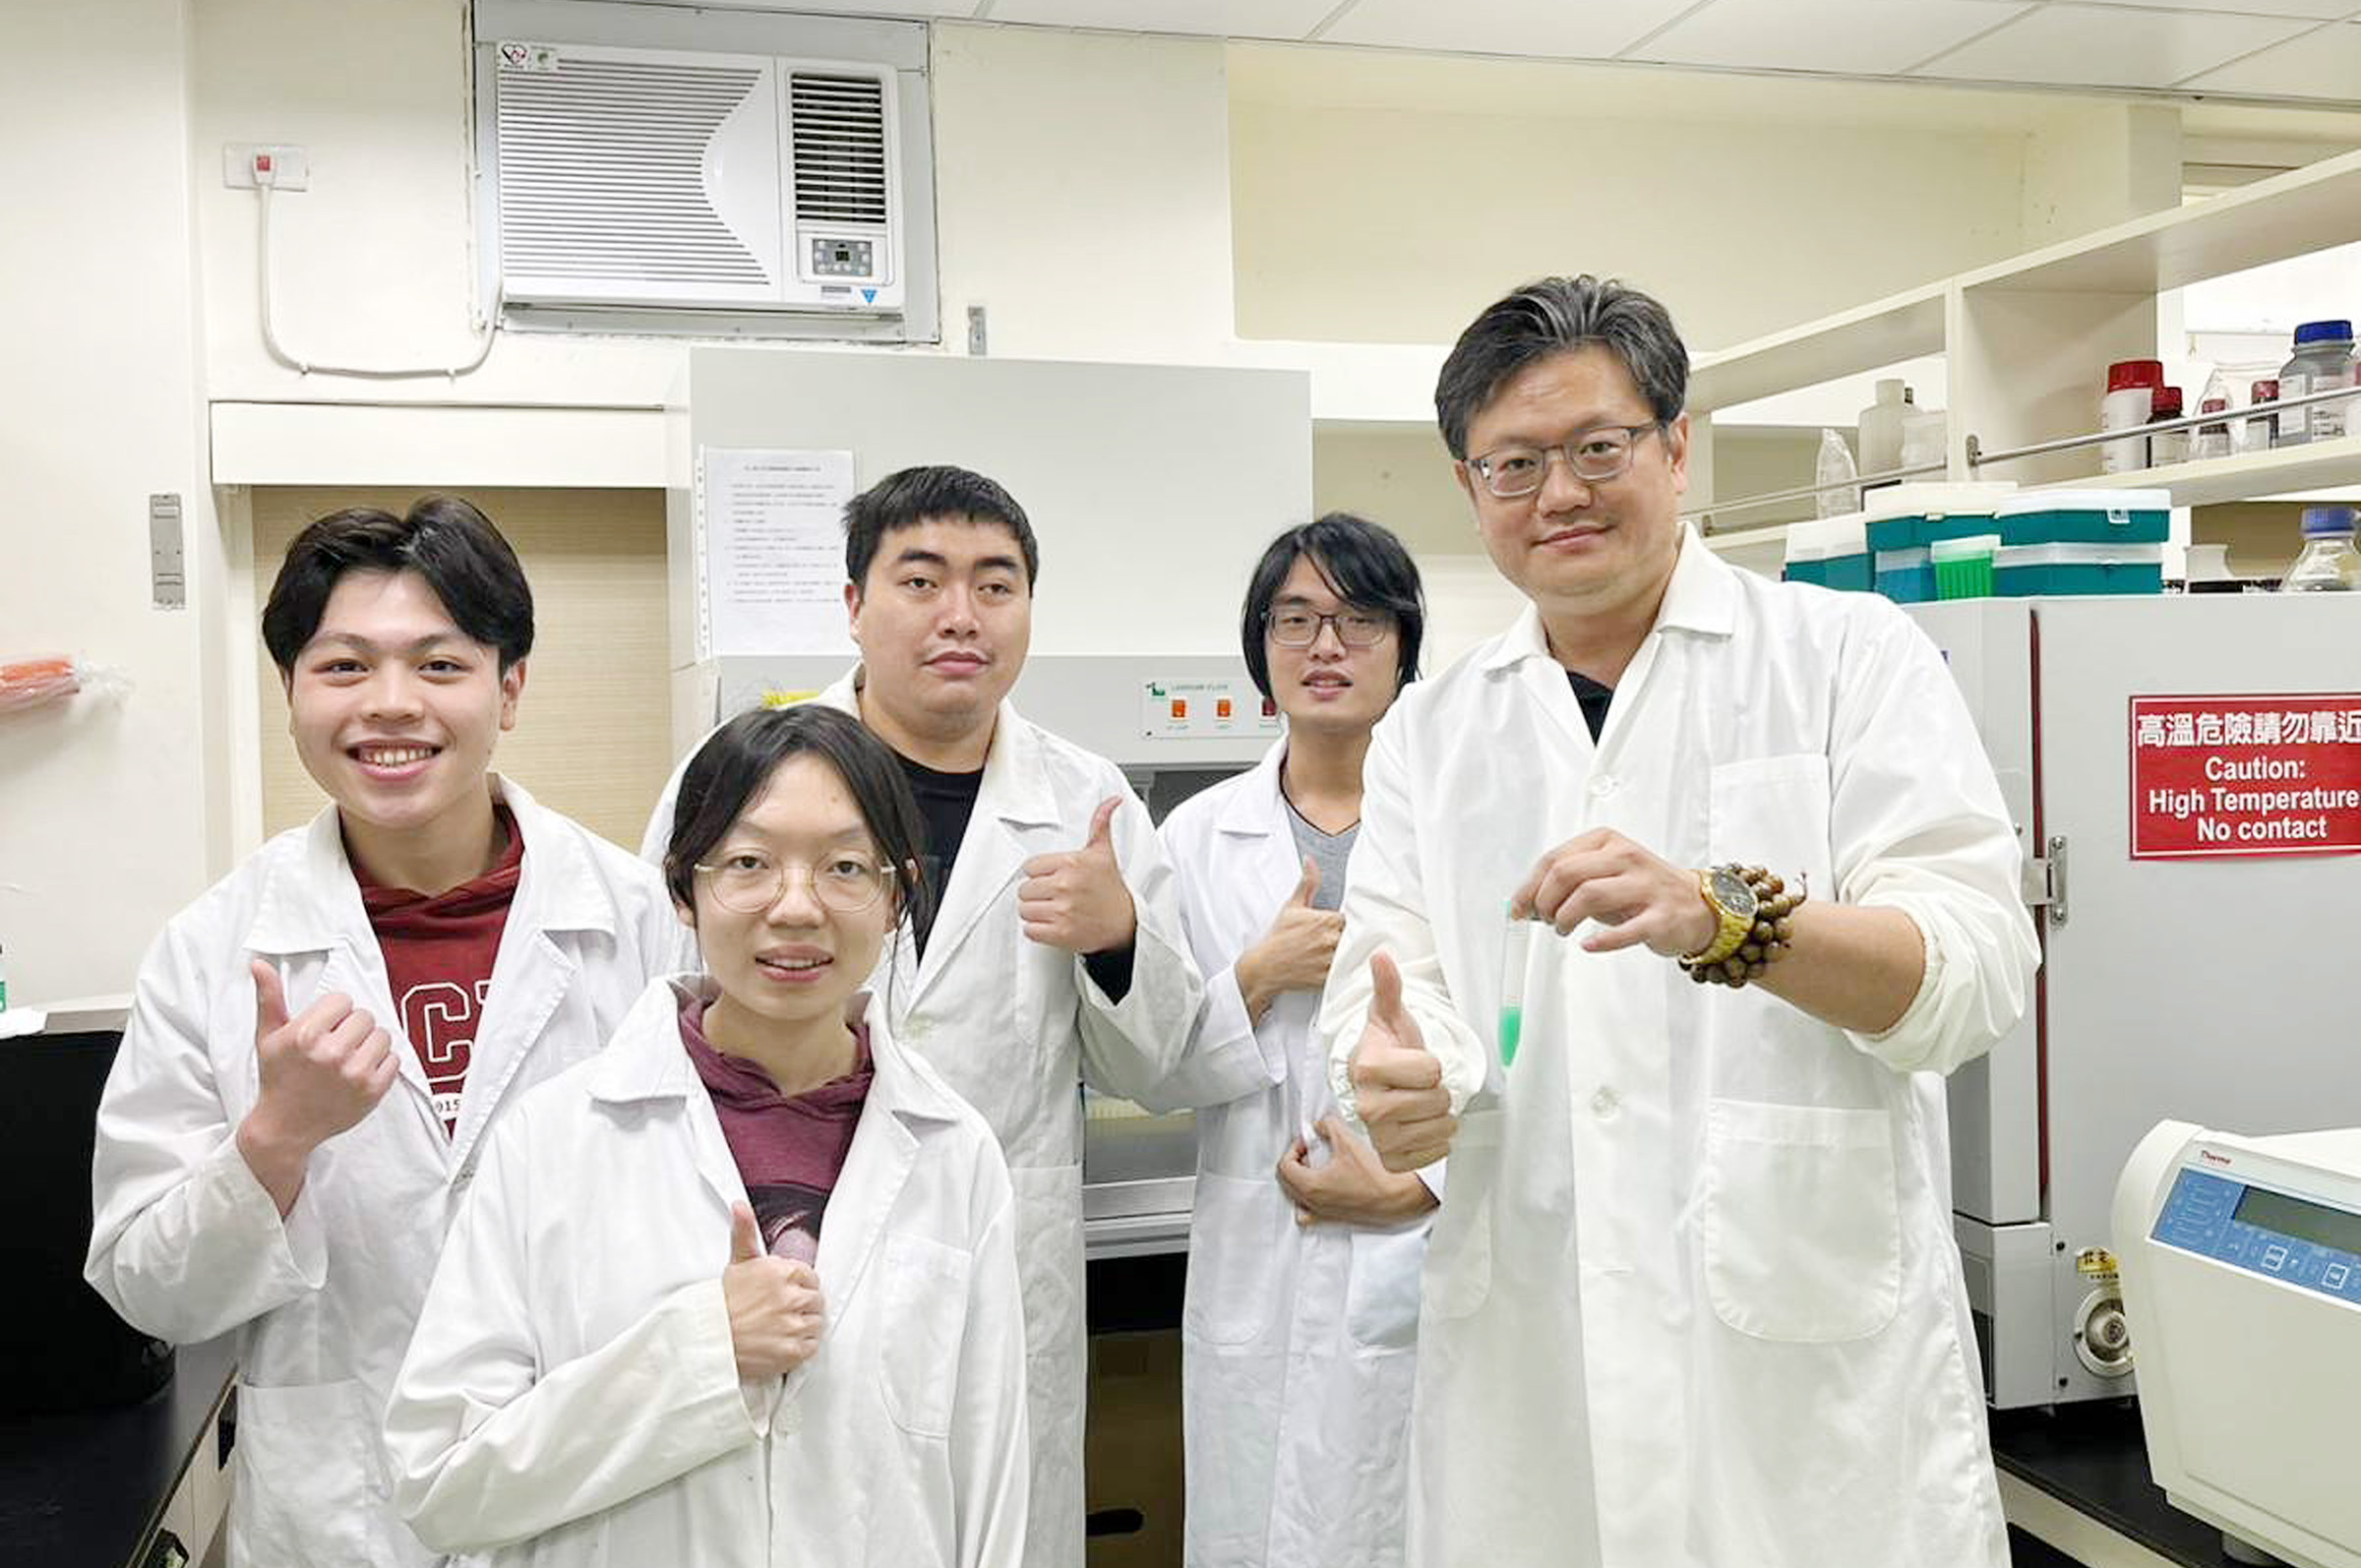 The Dawn of Colorectal Cancer Therapy: The Emerging Drug Nanocomposites developed by Professor Yu-Hsiang Lee Offer Novel Treatment Strategy